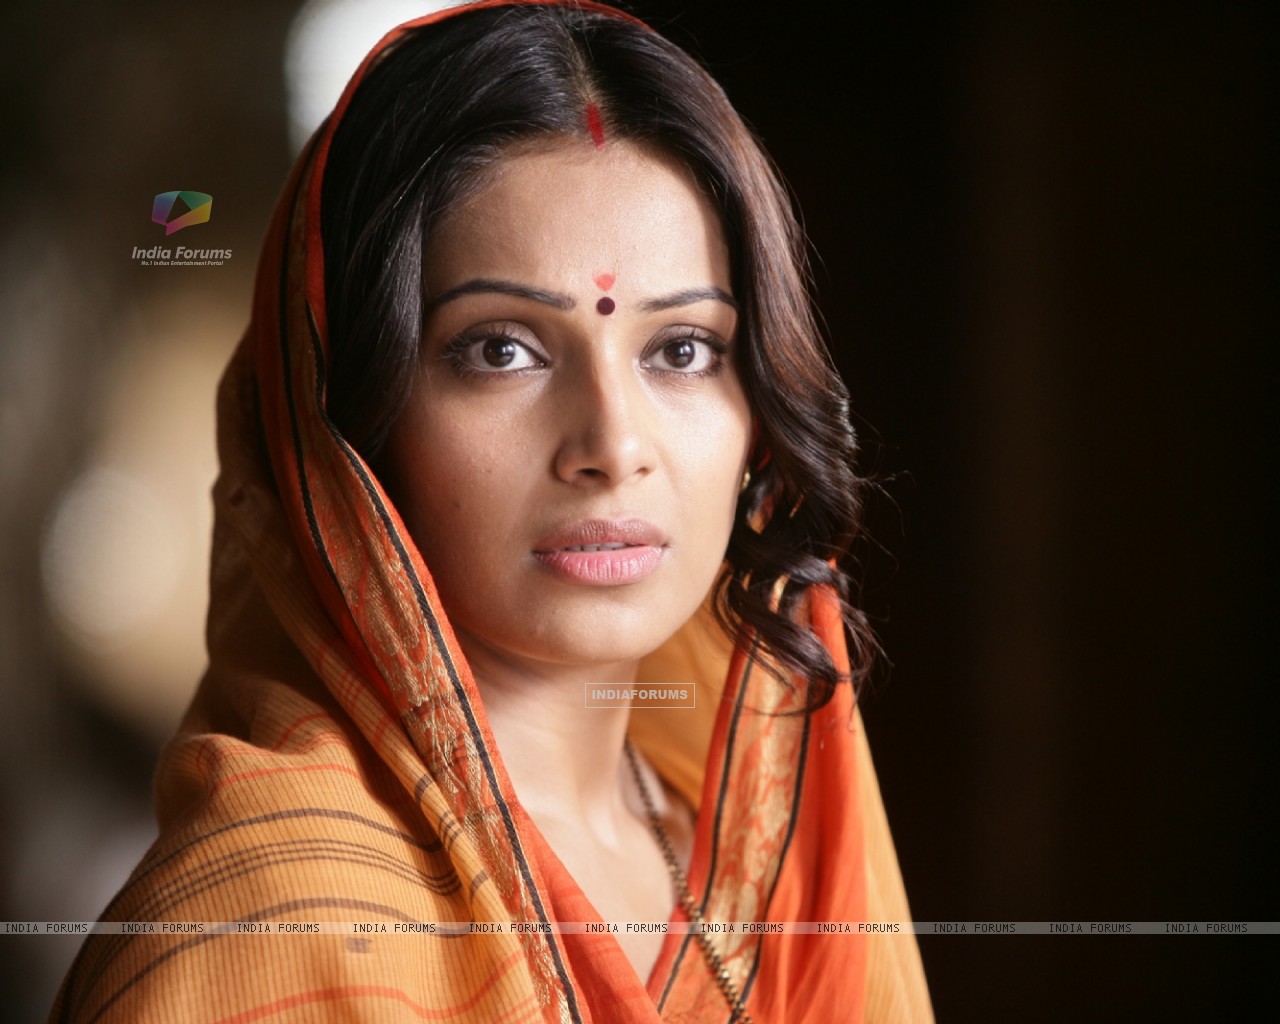 http://img.india-forums.com/wallpapers/1280x1024/93527-bipasha-basu-in-the-movie-aakrosh.jpg